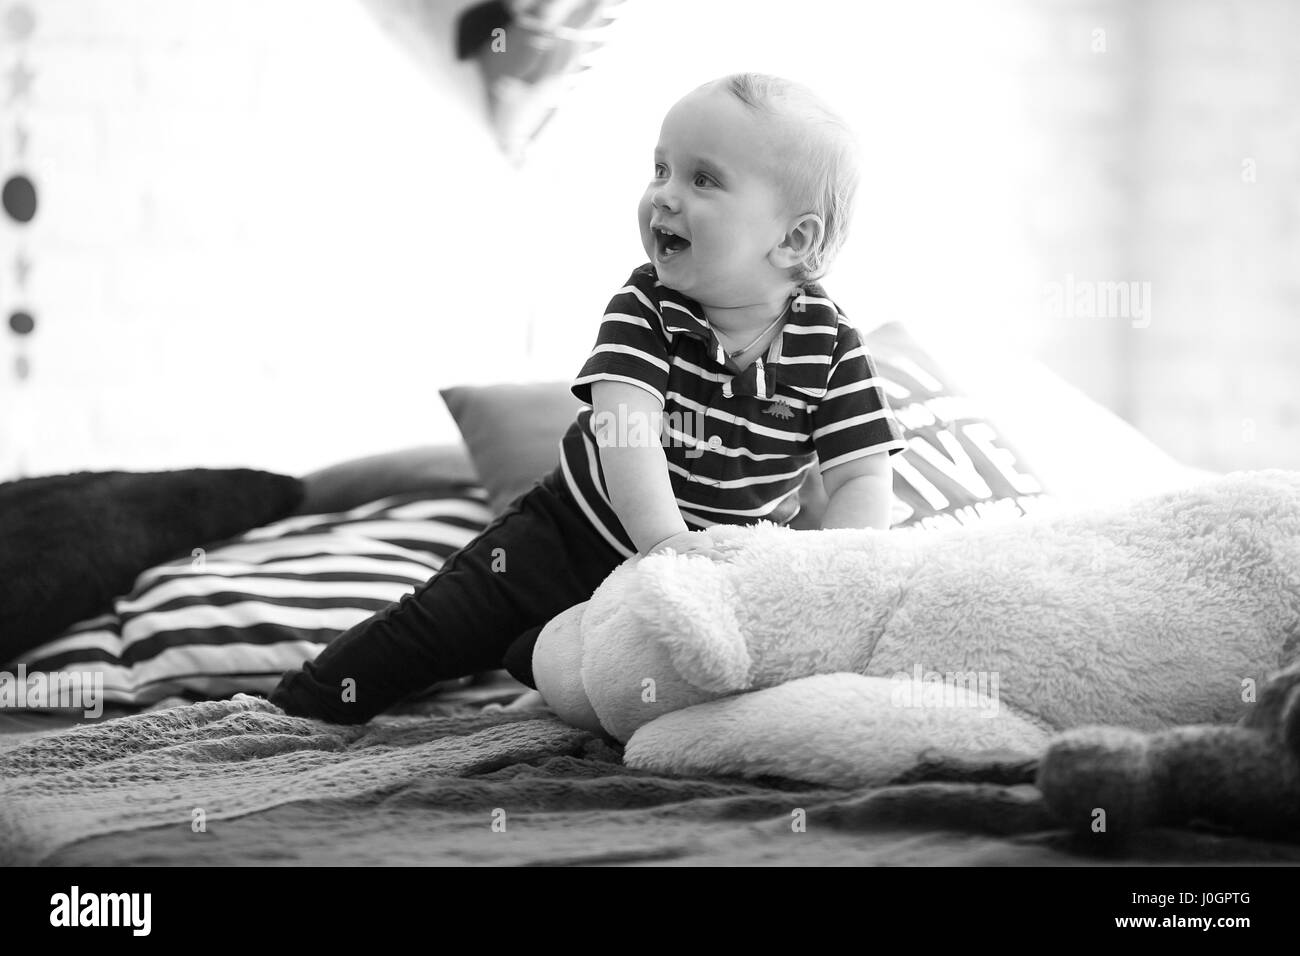 Small baby sits on bed next to teddy bear and laughs. Black and white image. Stock Photo